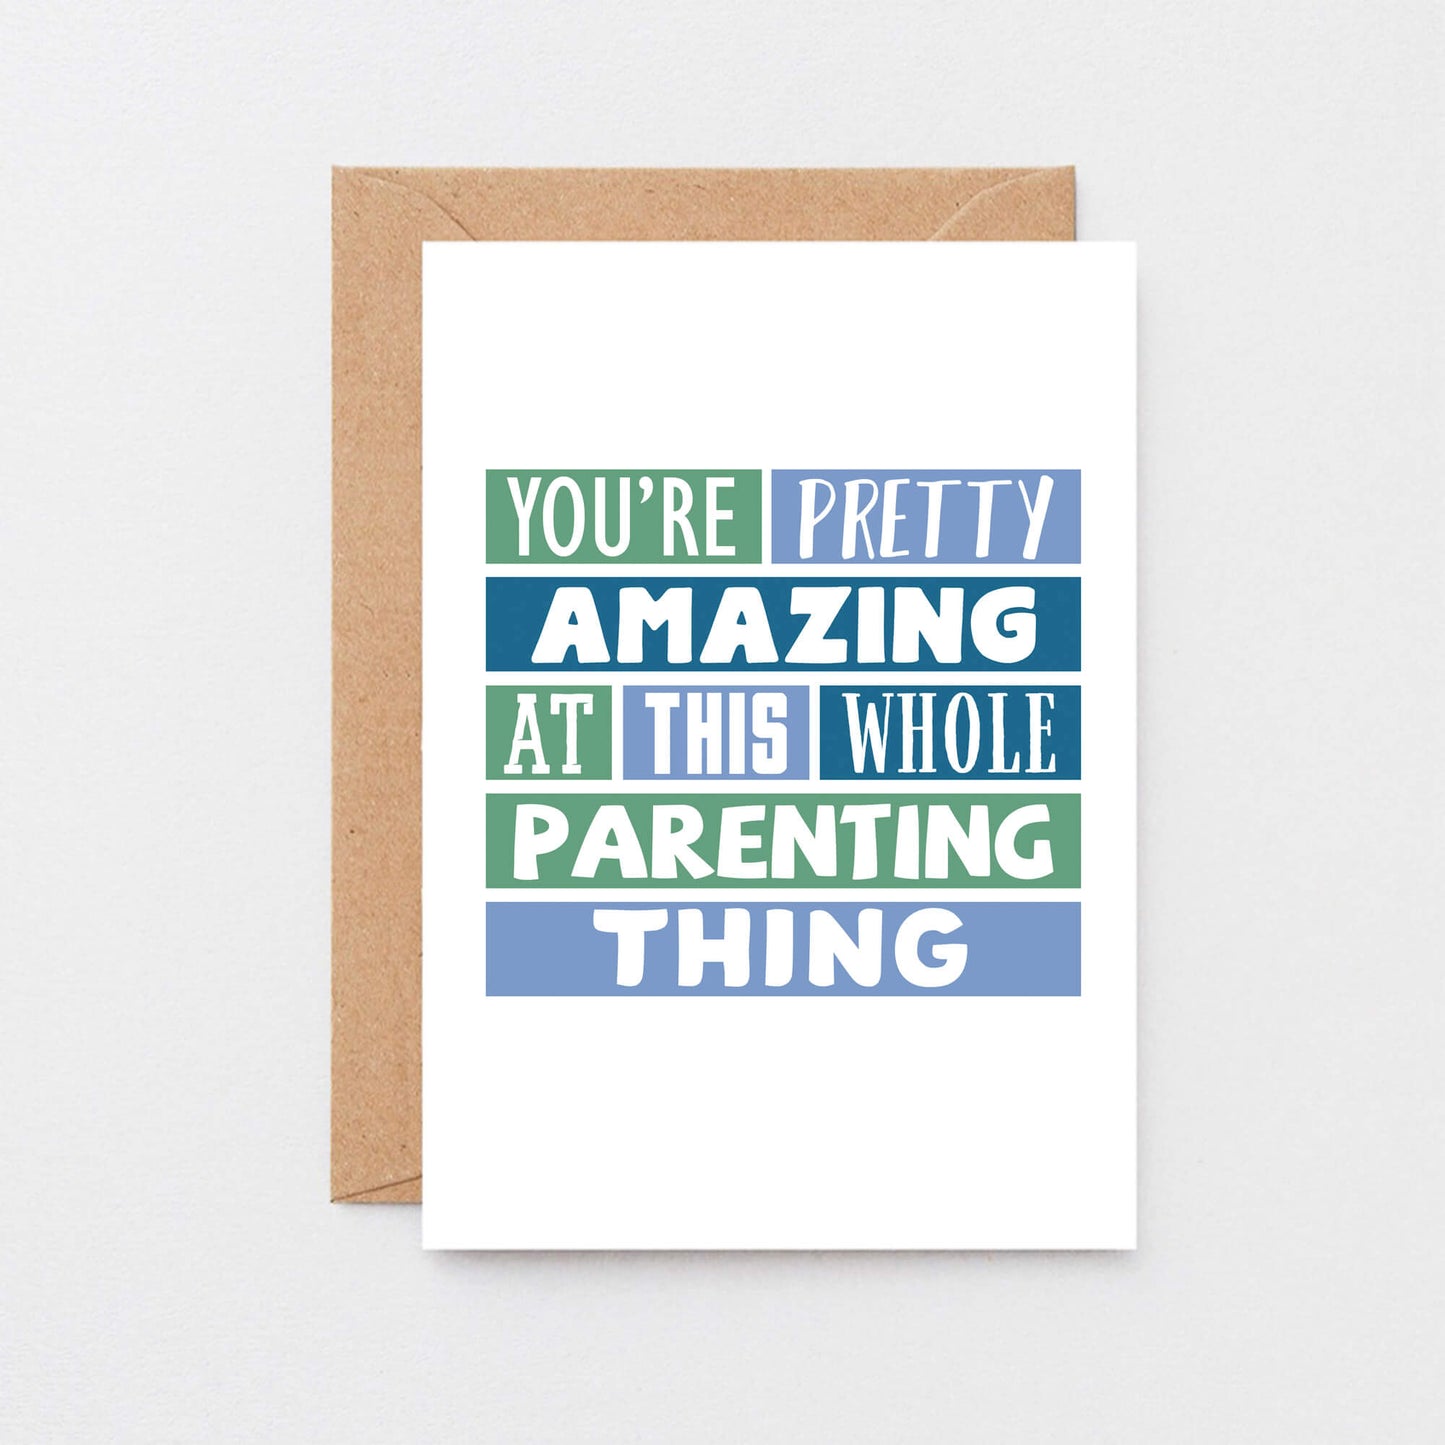 Encouragement Card by SixElevenCreations. Reads You're pretty amazing at this whole parenting thing. Product Code SE0192A6